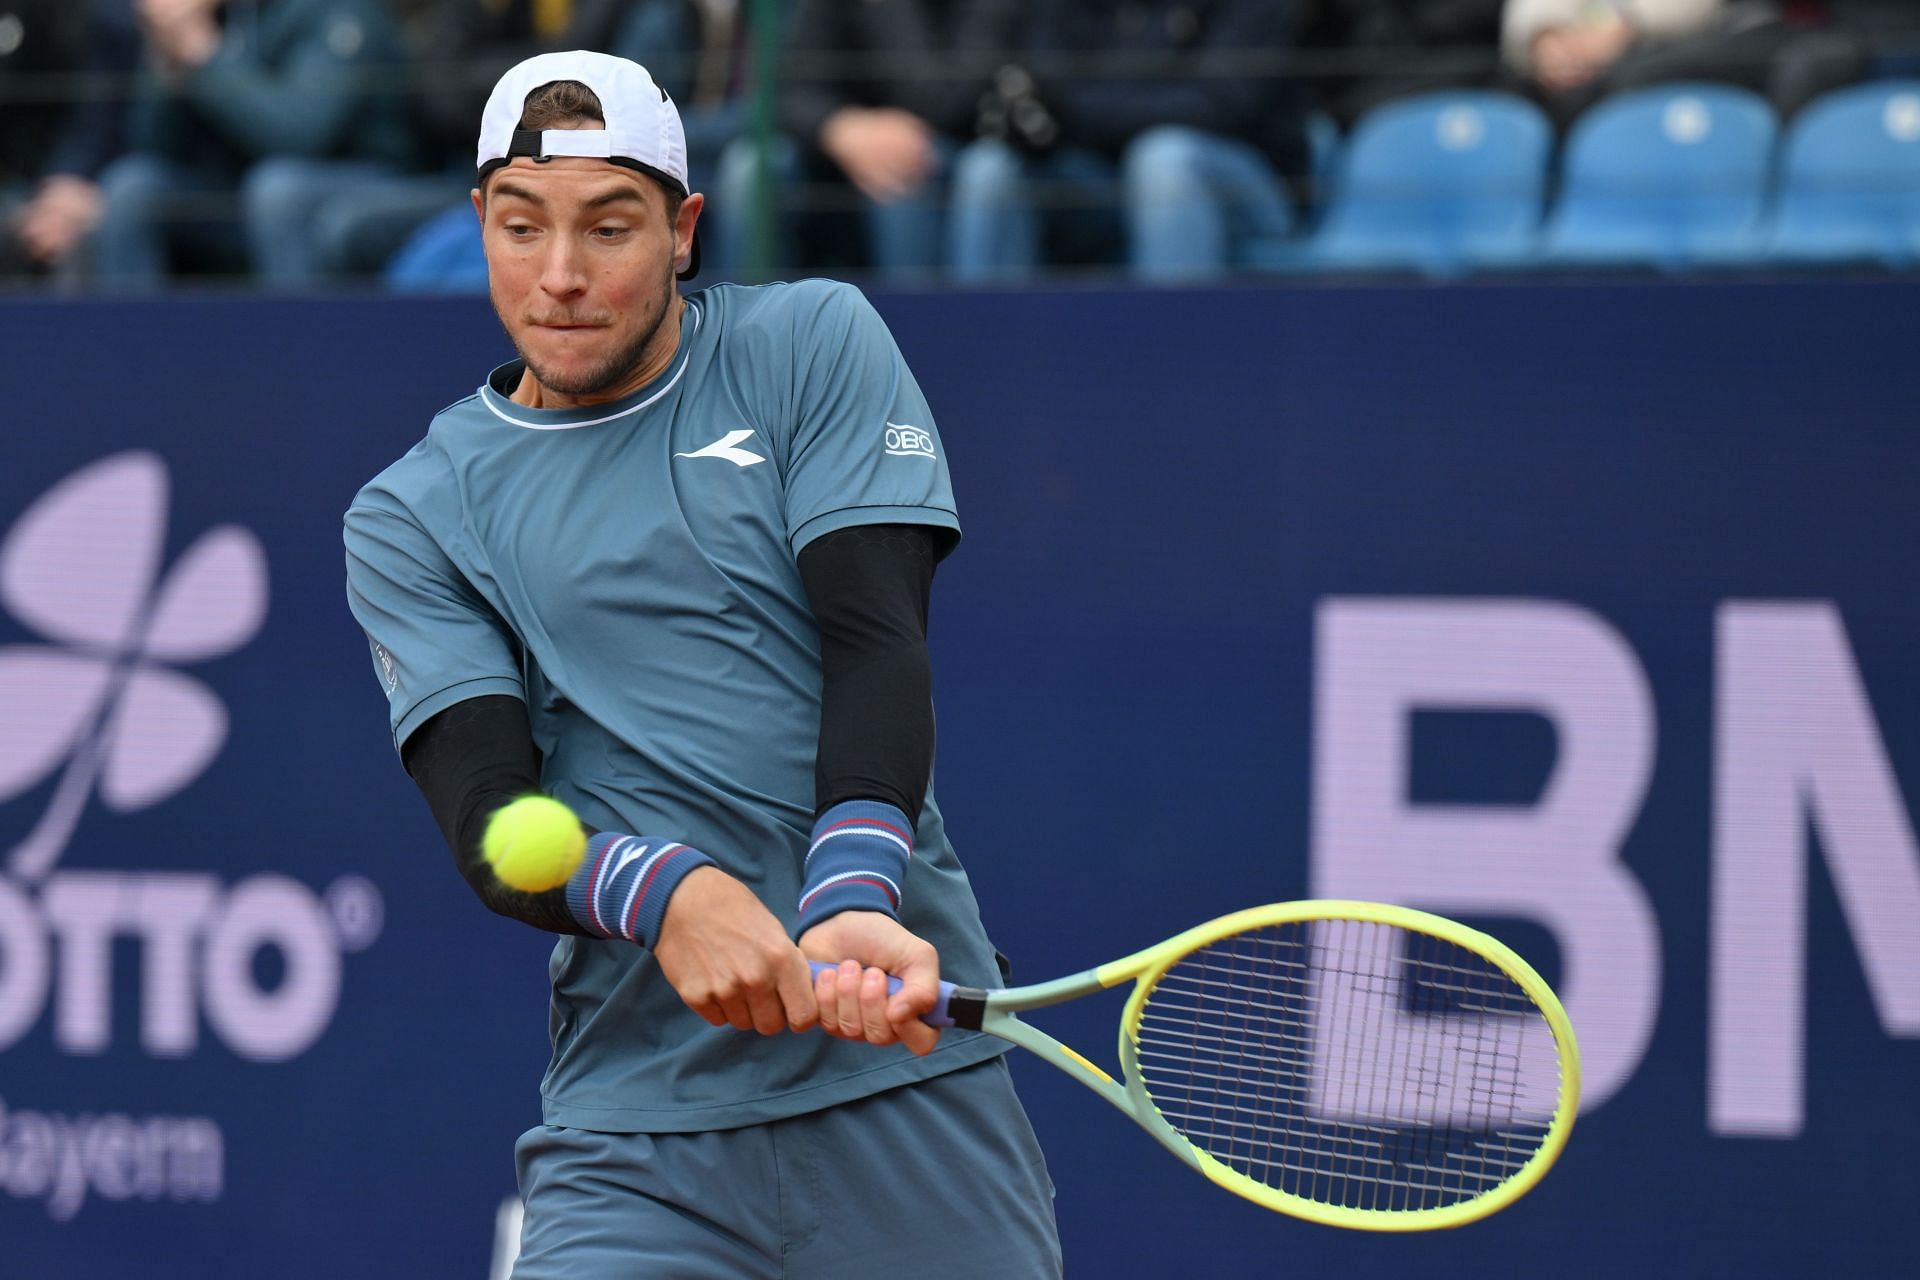 Struff is yet to drop a set this week.